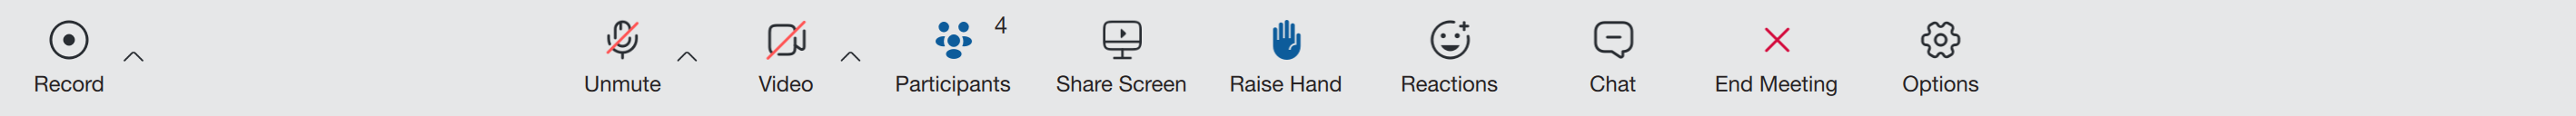 7.0_meeting_toolbar_raise_hand_option_active.png